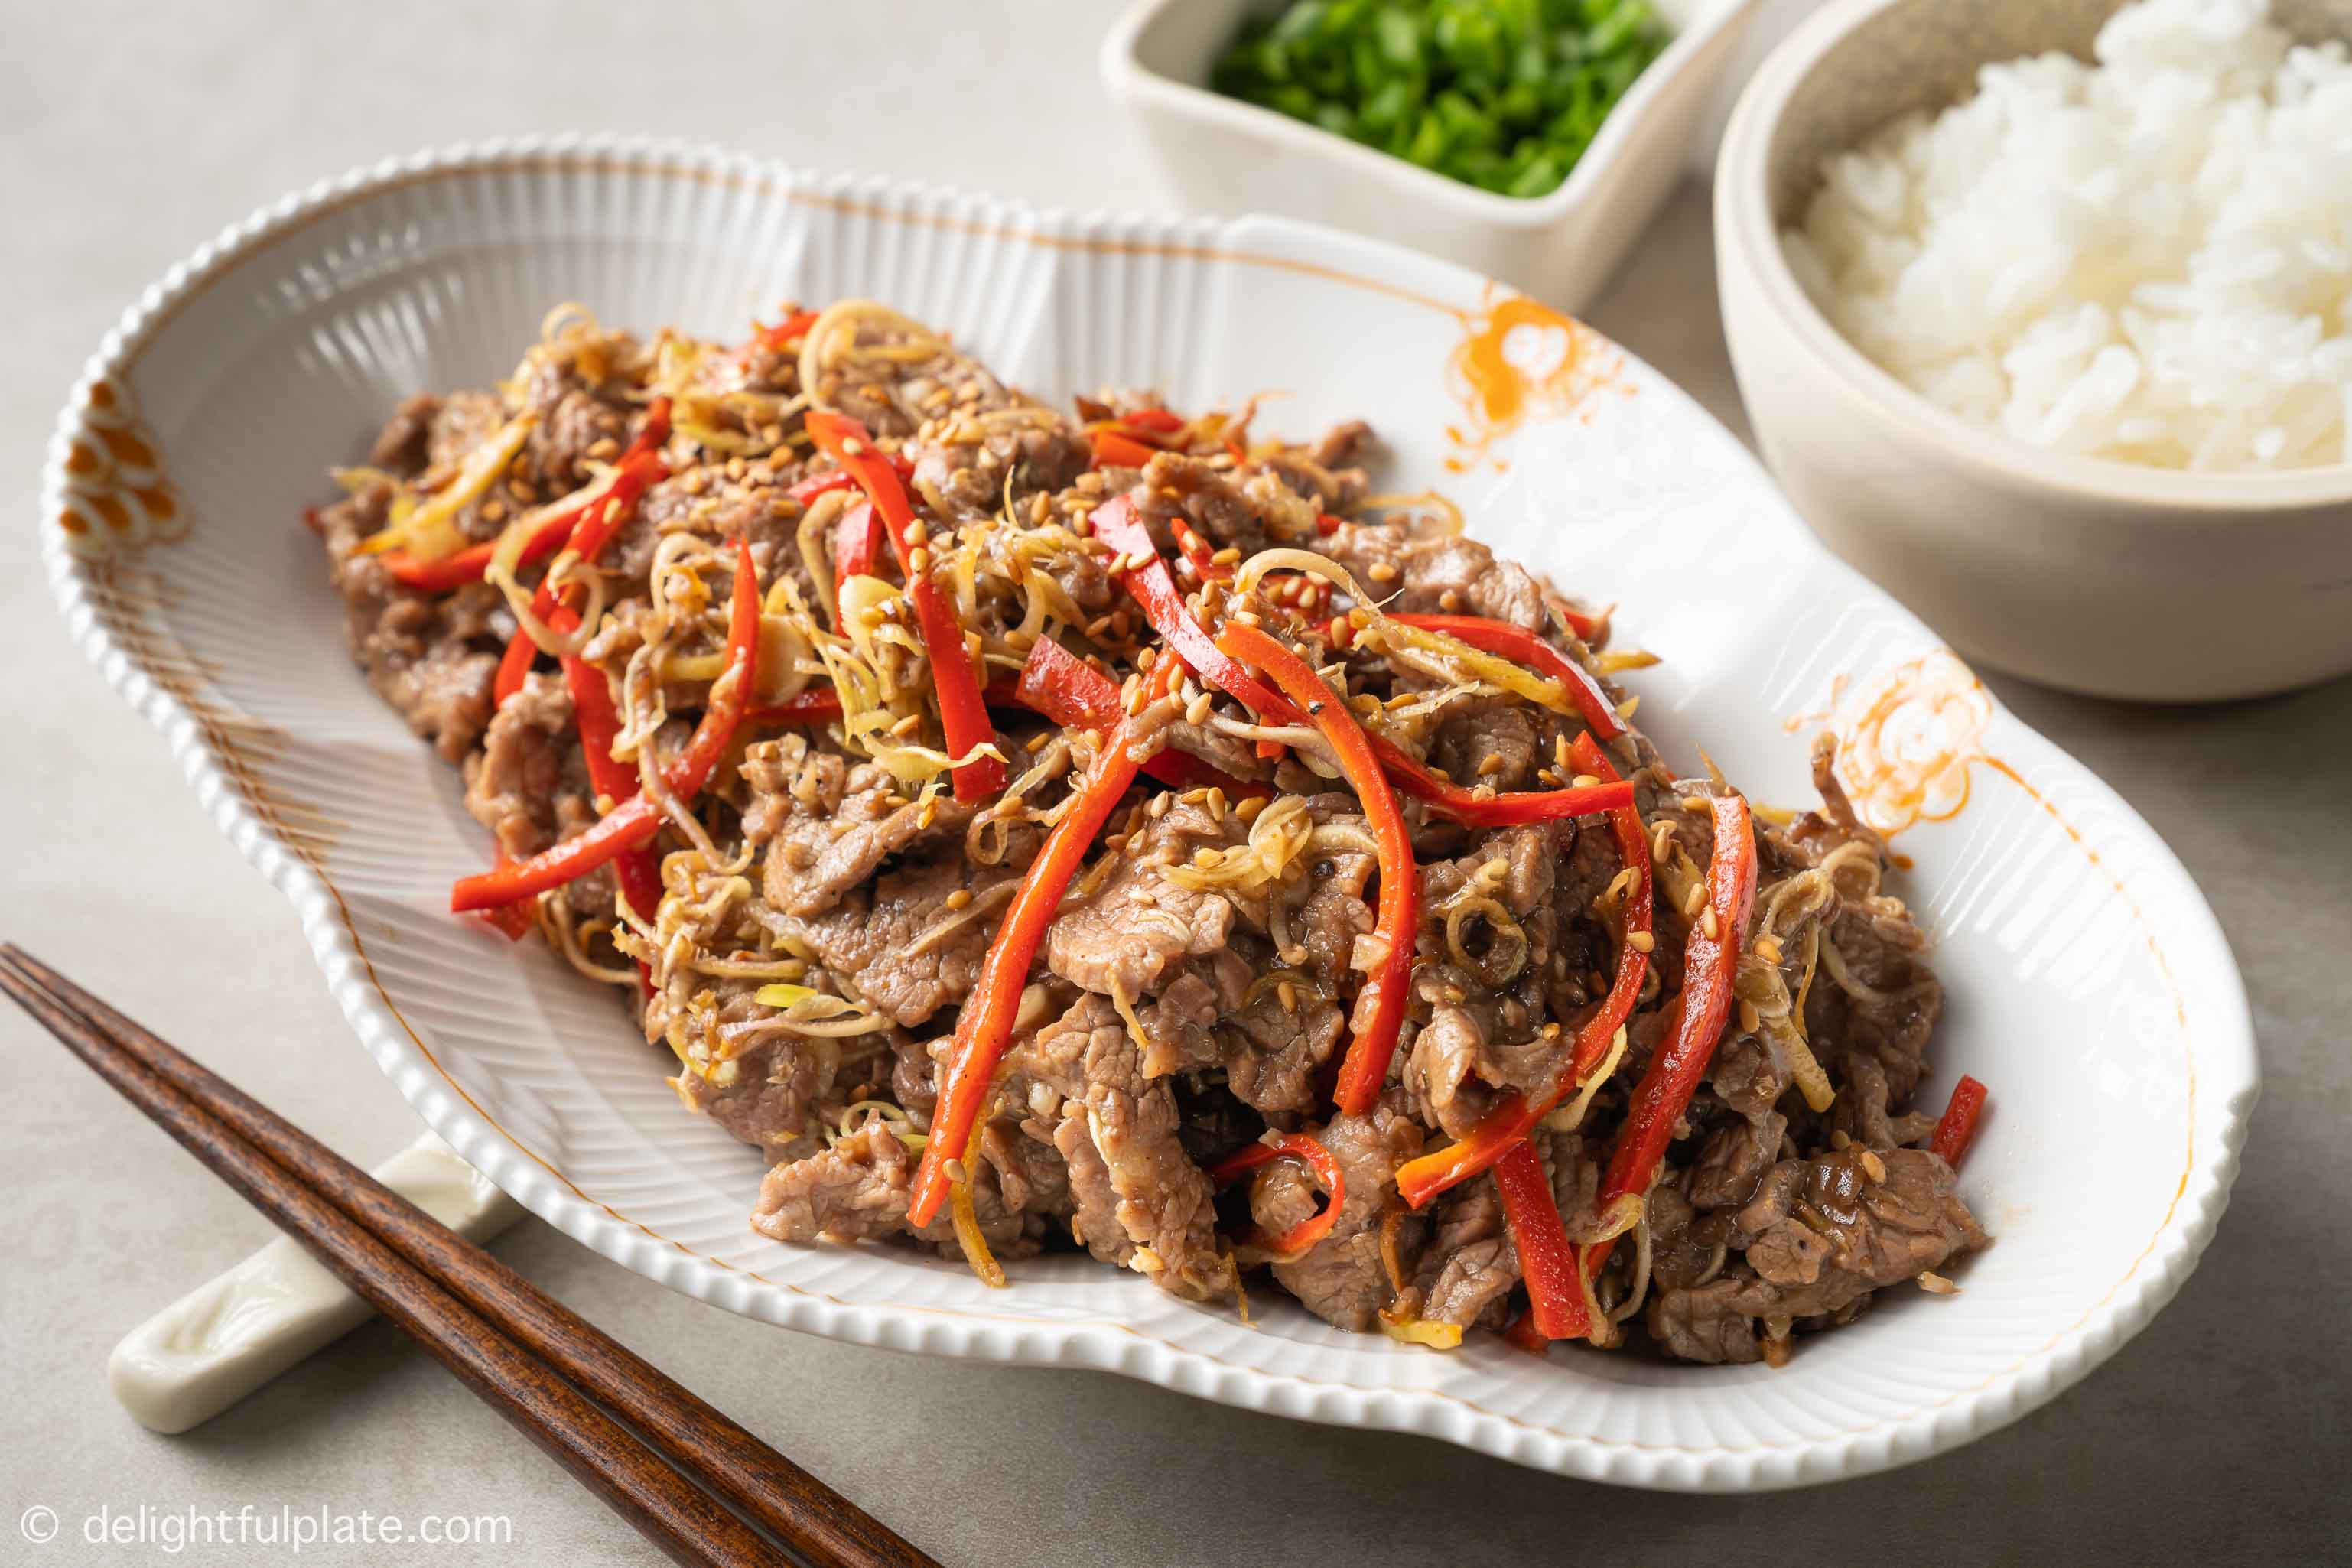 a plate of Vietnamese sautéed beef with lemongrass and chili